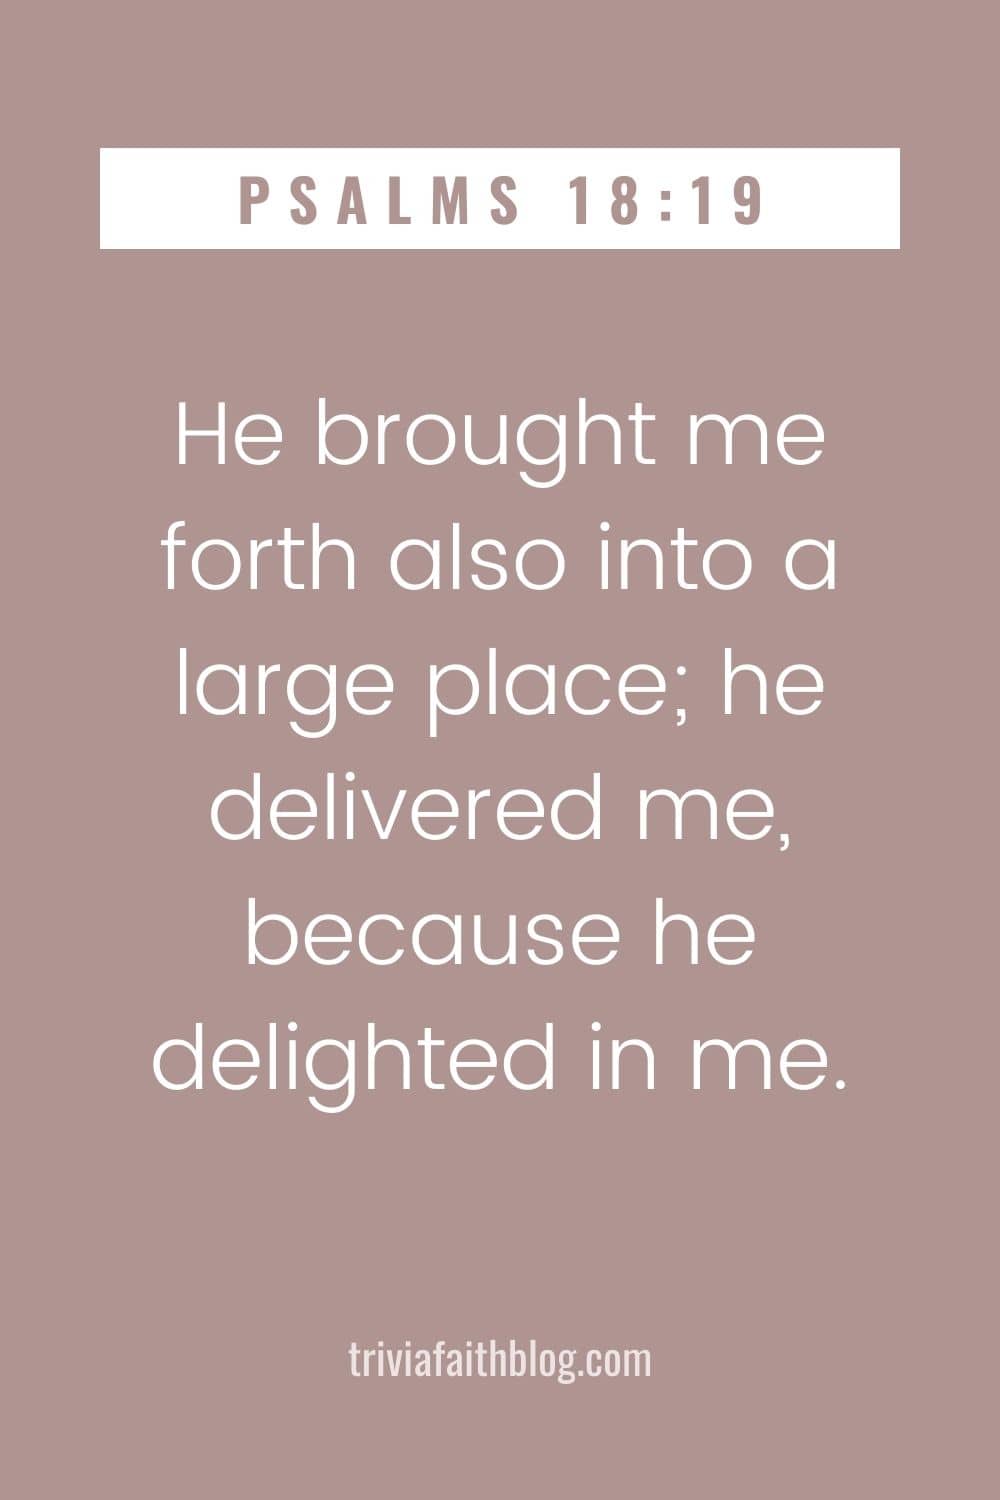 He brought me forth also into a large place he delivered me, because he delighted in me